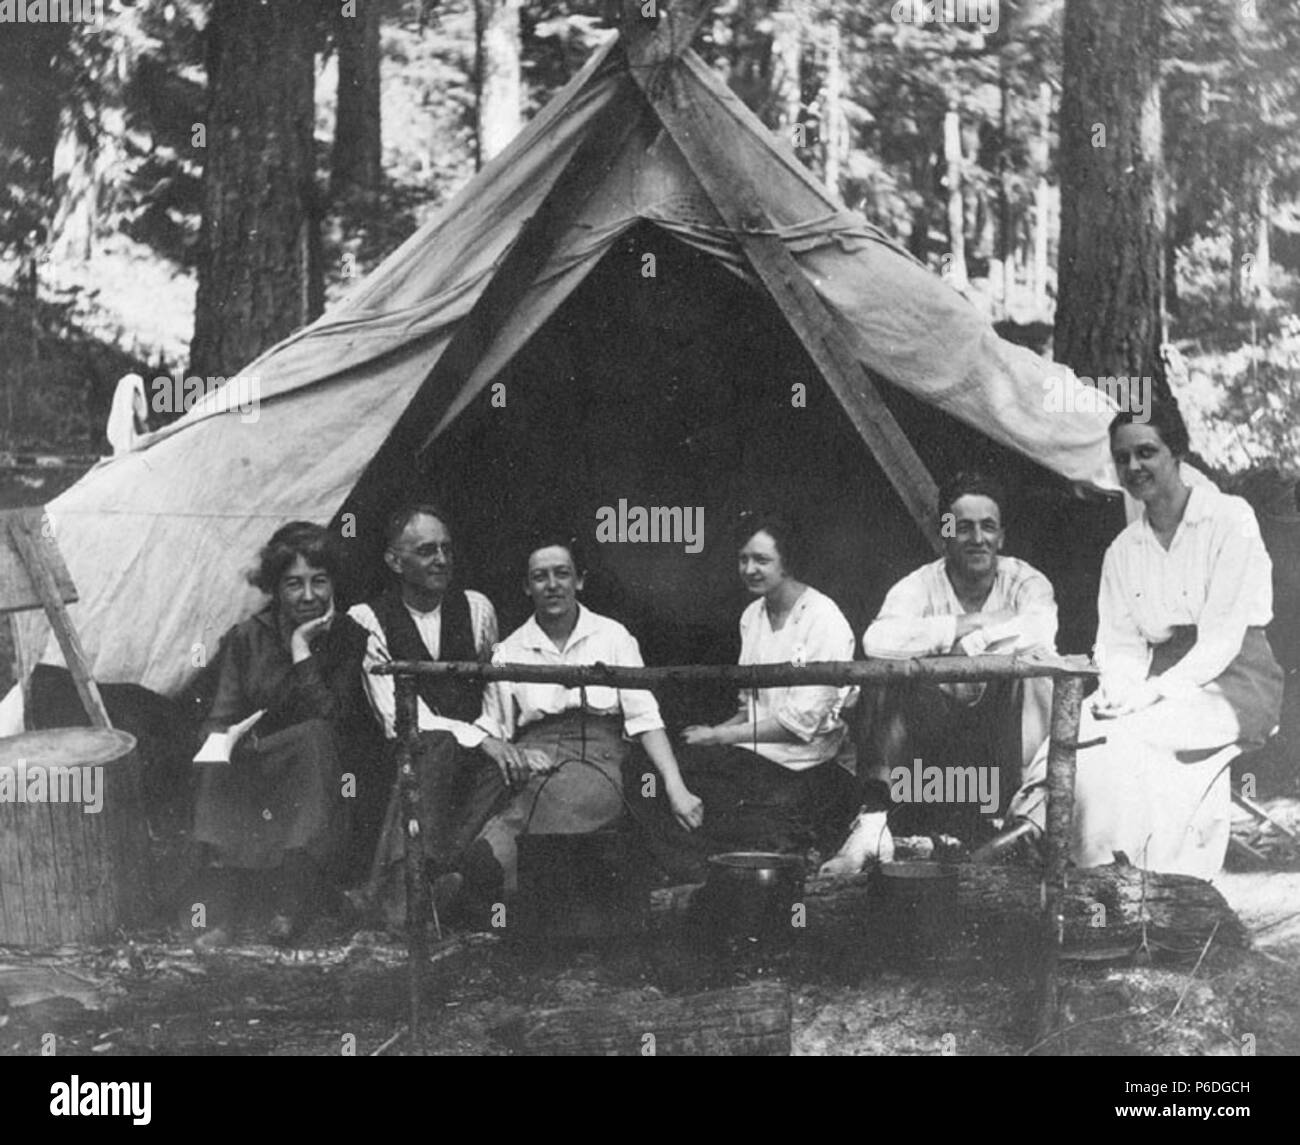 . English: H. Ambrose Kiehl, Laura Kiehl, and others at a campsite, Washington, July 15, 1917 . English: Caption on image: July 15, 1917 Album 1.230 Subjects (LCSH): Kiehl, H. Ambrose; Kiehl, Laura; Camp sites, facilities, etc.--Washington (State); Tents--Washington (State); Campers (Persons)--Washington (State) Concepts: Recreational activities  . 1917 51 H Ambrose Kiehl, Laura Kiehl, and others at a campsite, Washington, July 15, 1917 (KIEHL 281) Stock Photo